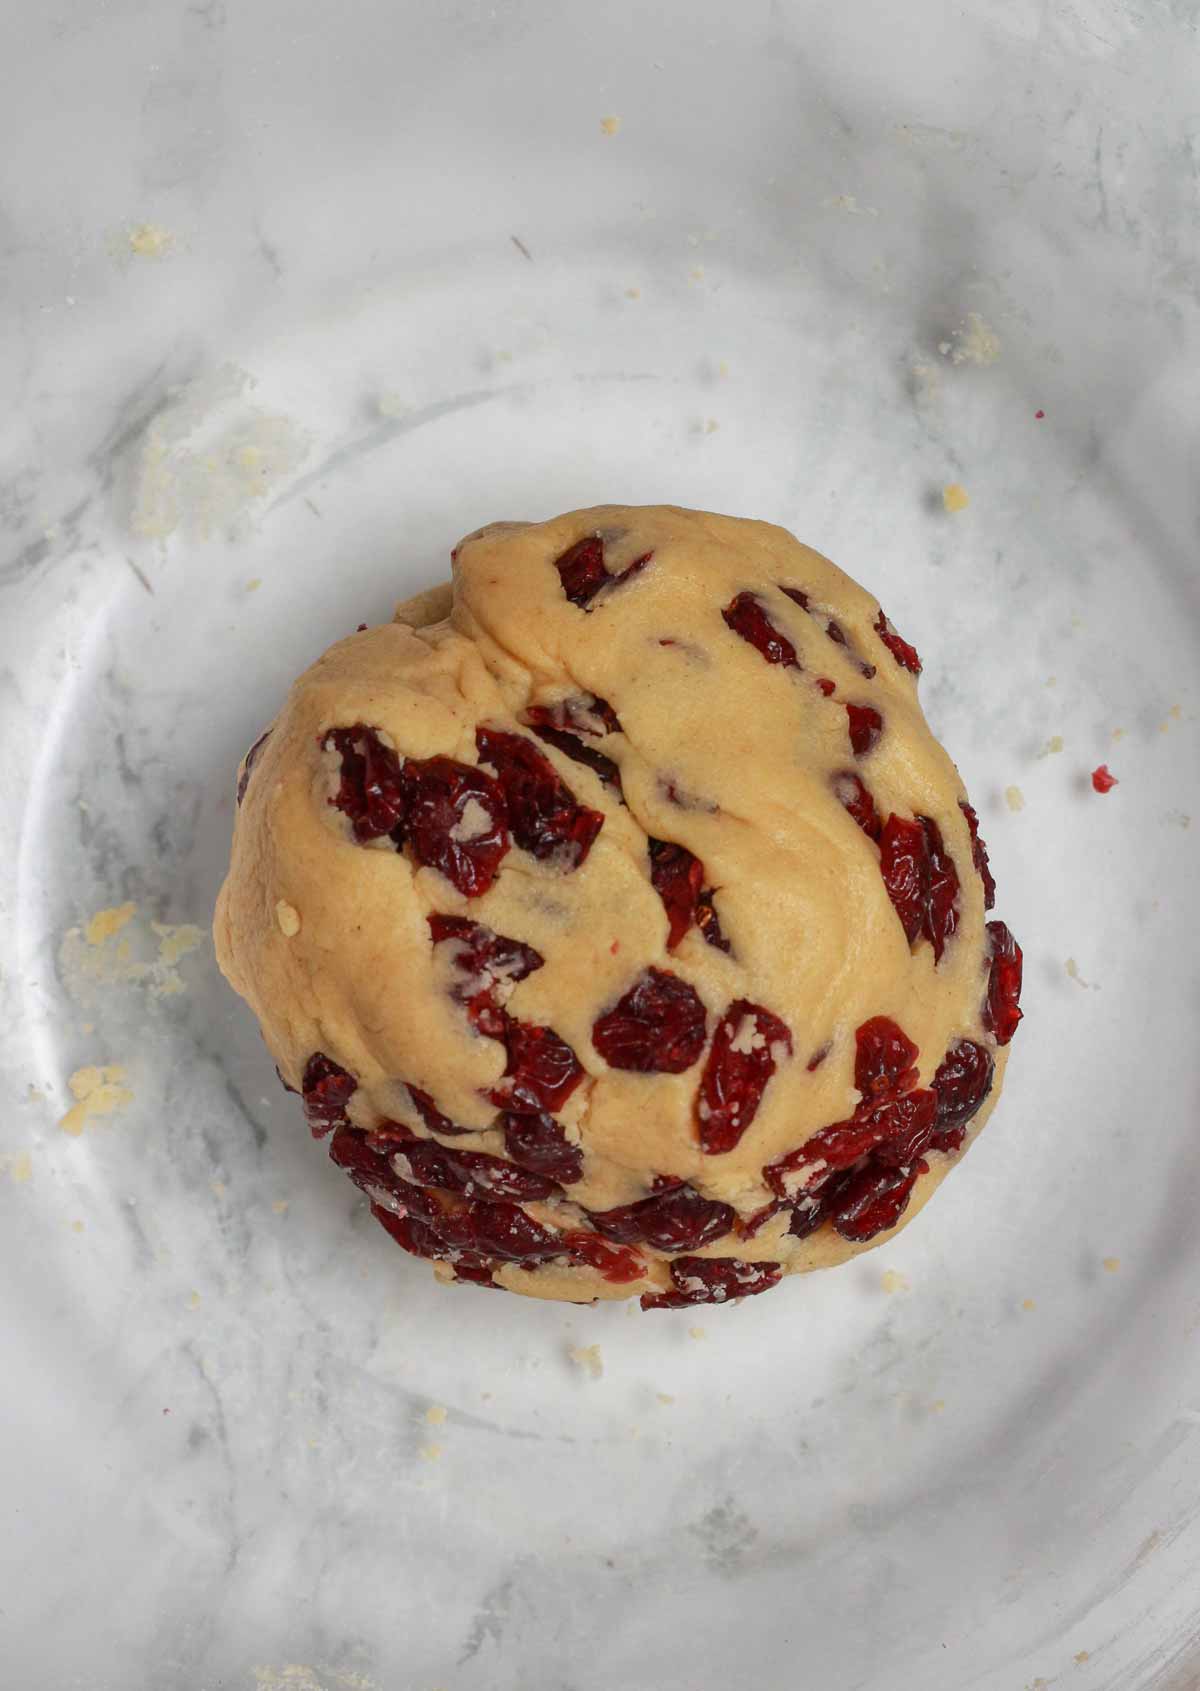 Ball Of Shortbread Dough With Cranberries In It